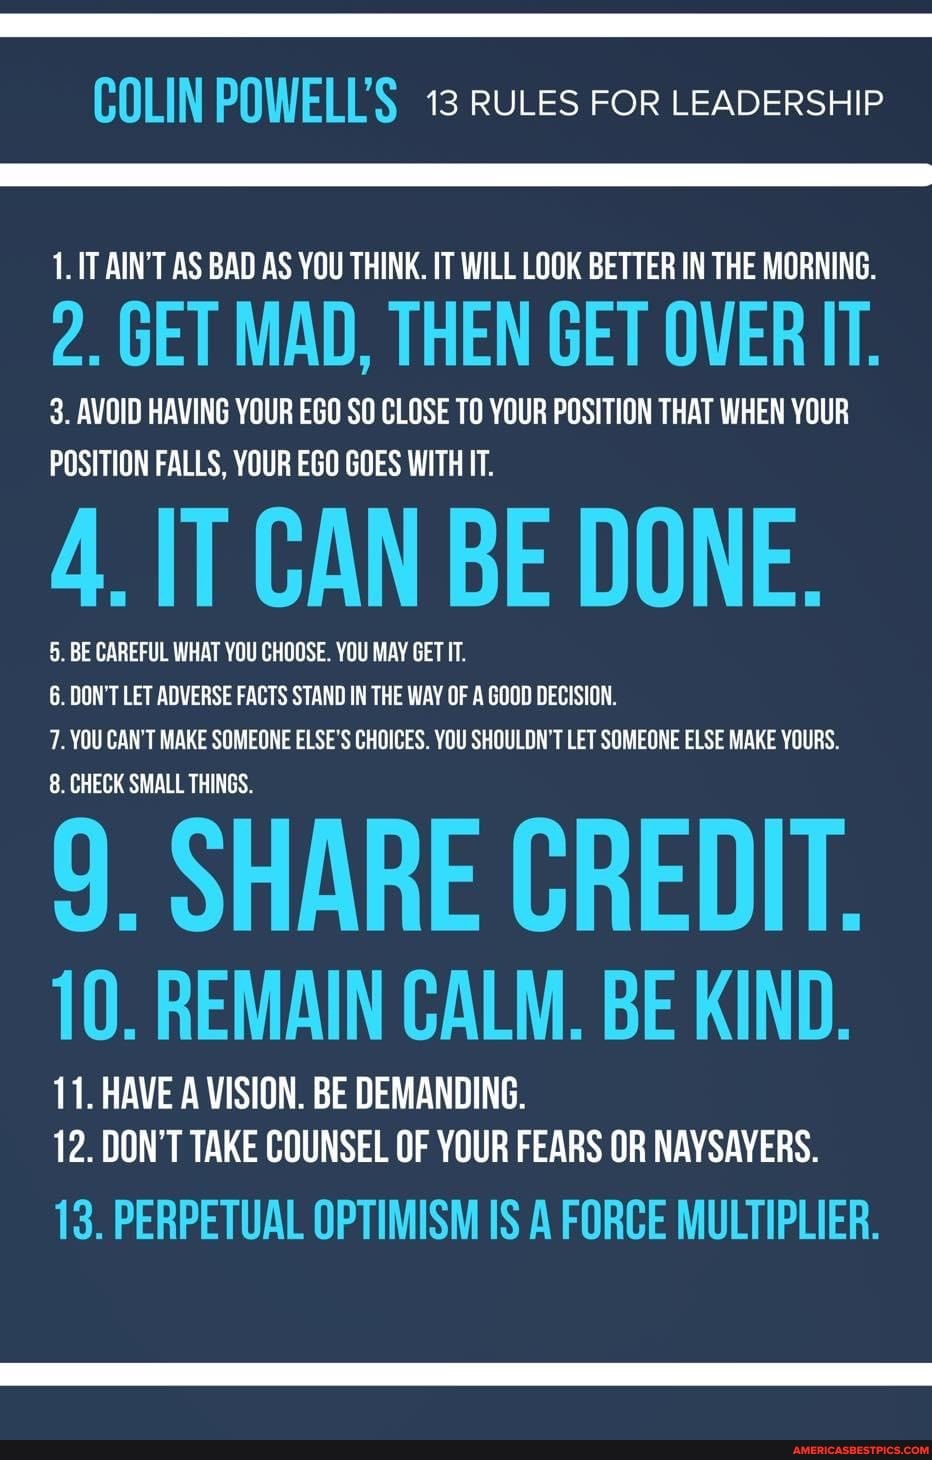 COLIN POWELL'S 13 RULES FoR LEADERSHIP 1. IT AIN'T AS BAD AS YOU THINK. IT